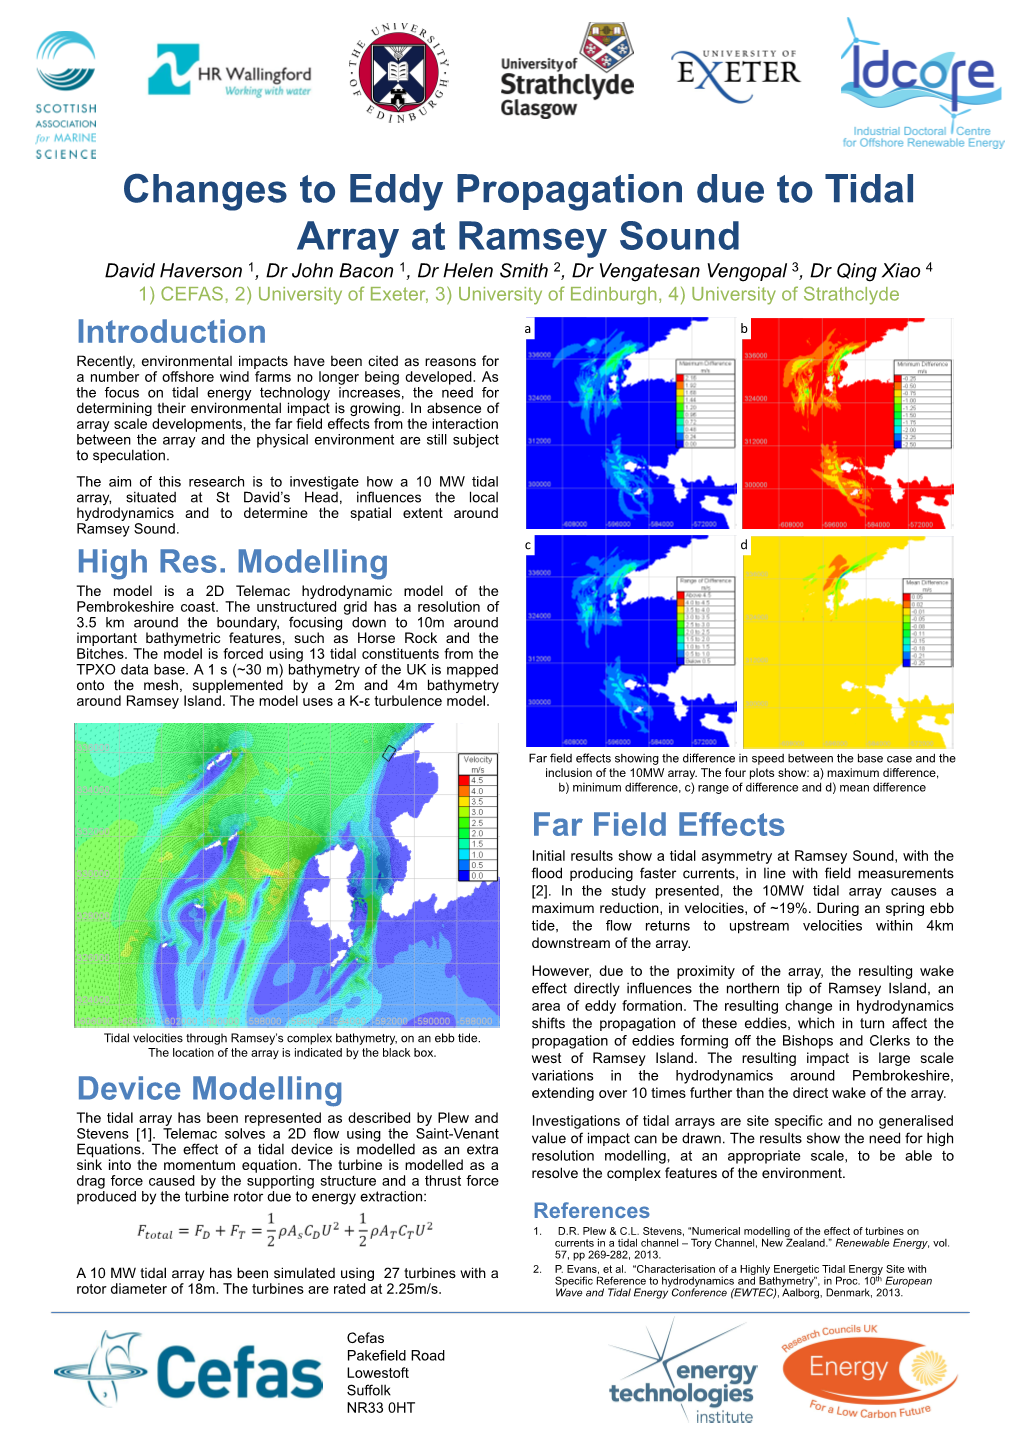 Changes to Eddy Propagation Due to Tidal Array at Ramsey